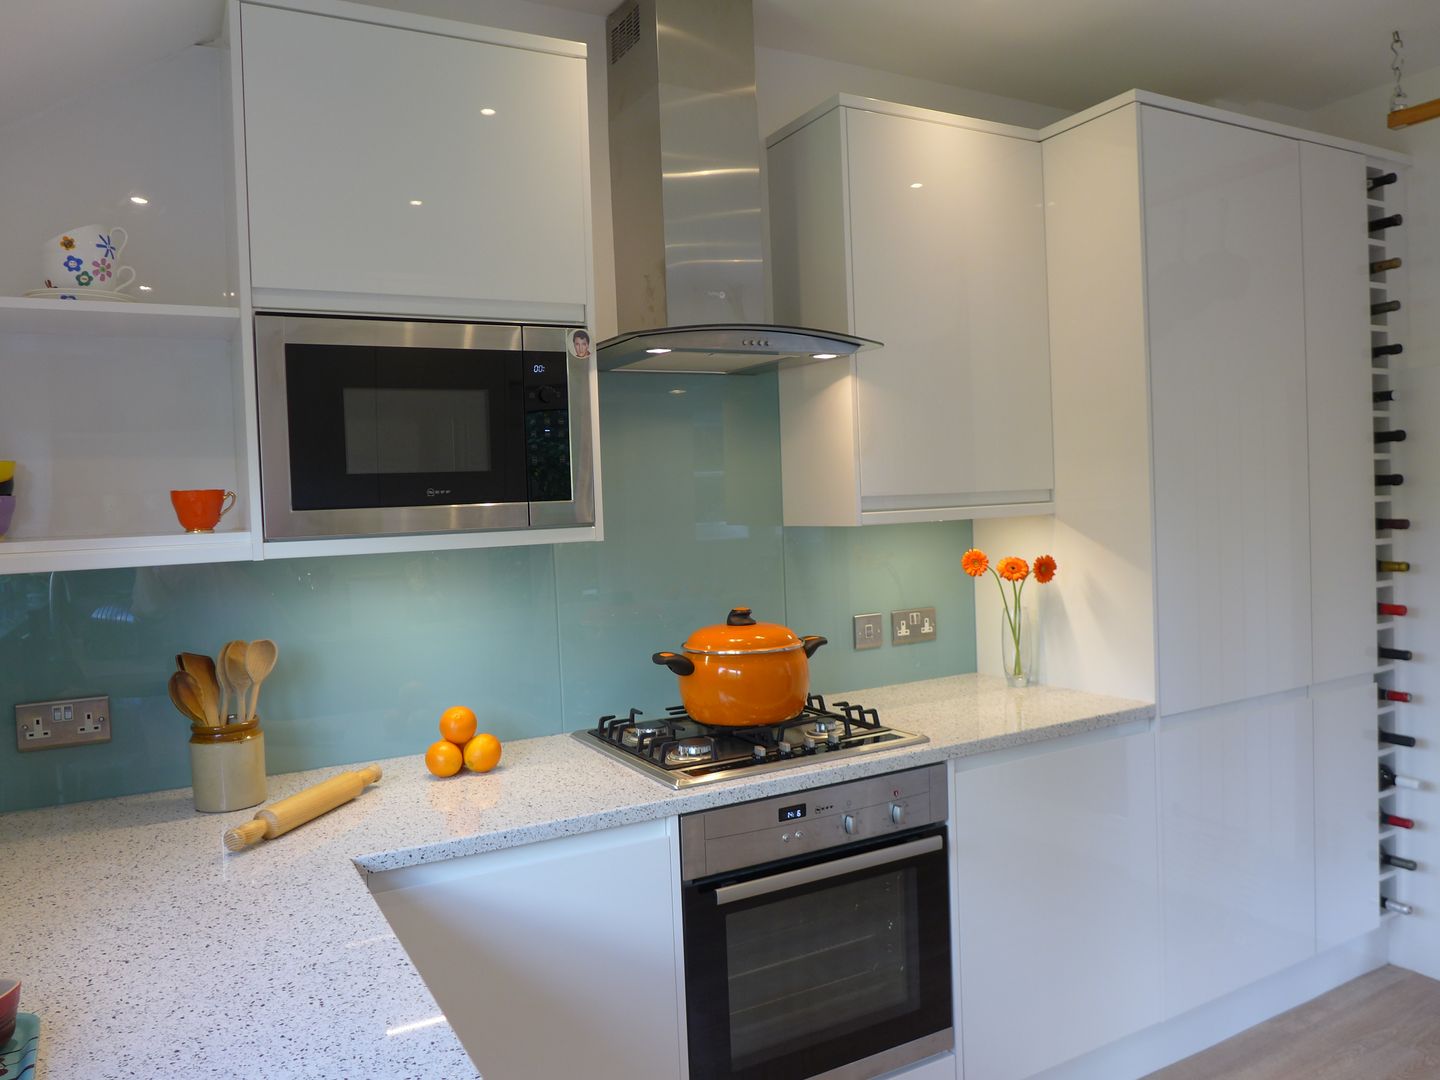 Modern white gloss kitchen Style Within Modern kitchen white kitchen,gloss kitchen,modern kitchen,flat kitchen cabinet,integrated microwave,integrated handle,kitchen lighting,glass splashback,kitchen splashback,blue splashback,quartz worktop,white worktop